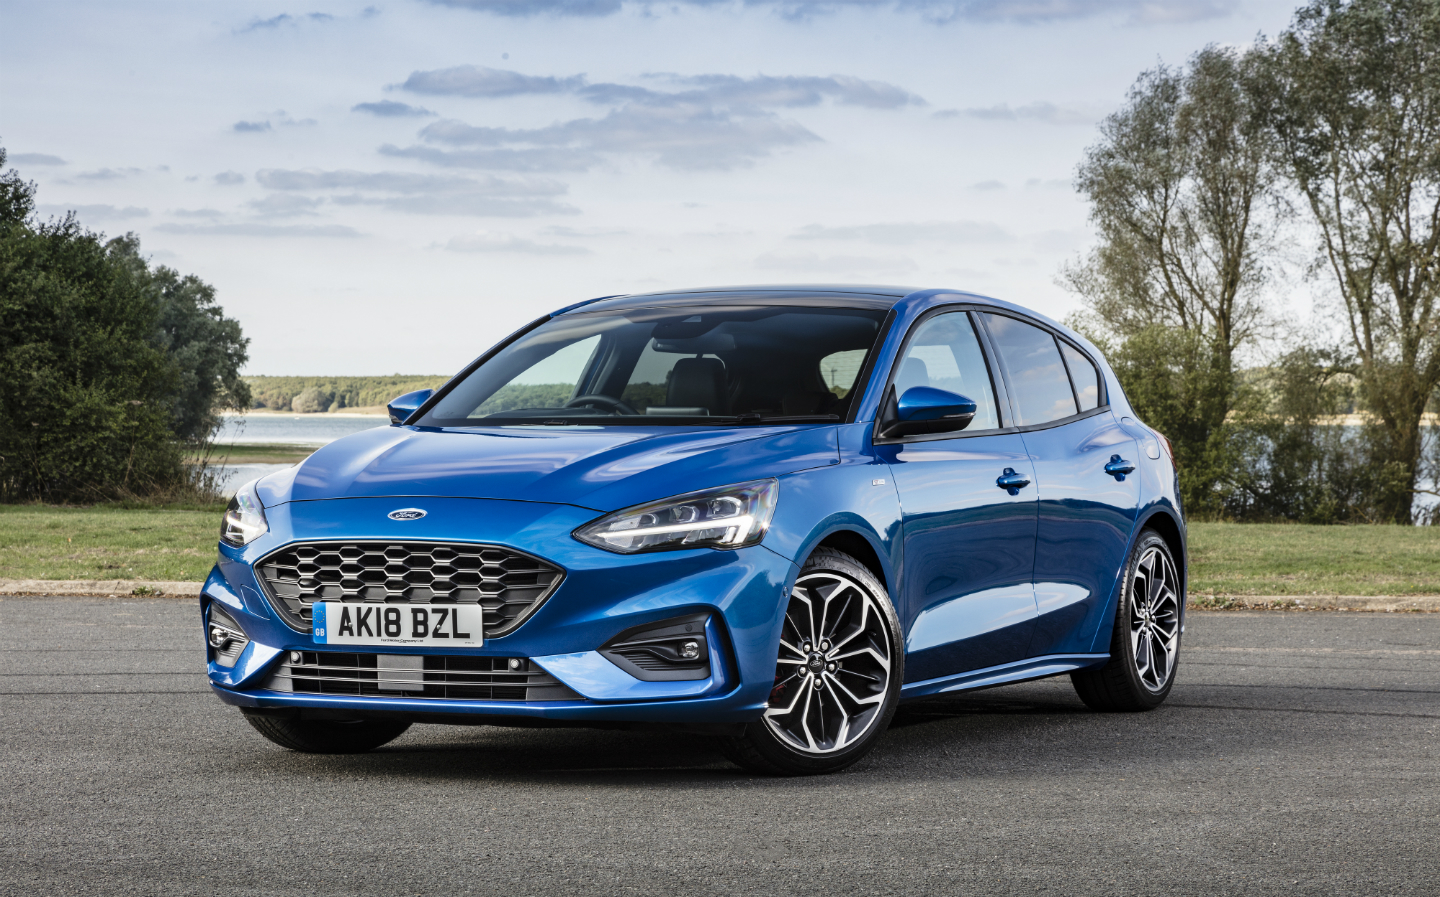 The UK's top 10 best-selling cars of 2019 (updated)